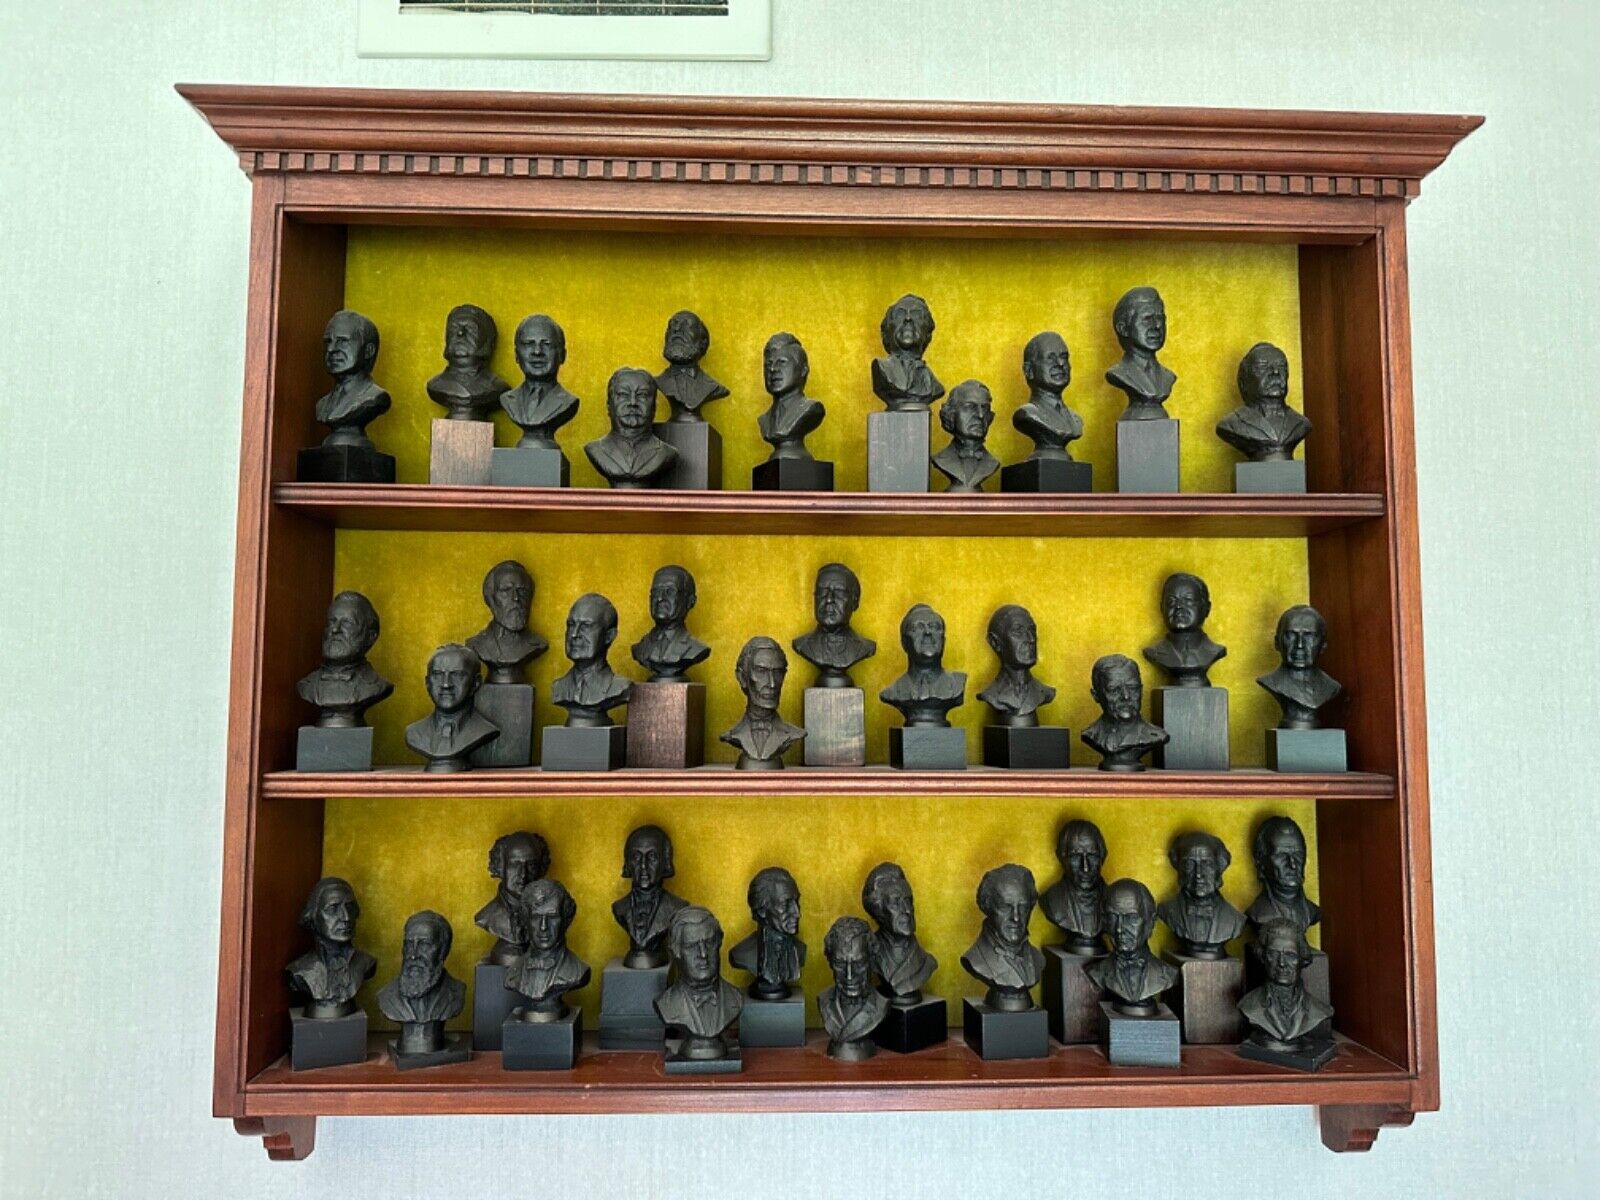 Presidential Bronzes collection display (38 mini bronze busts of US presidents)